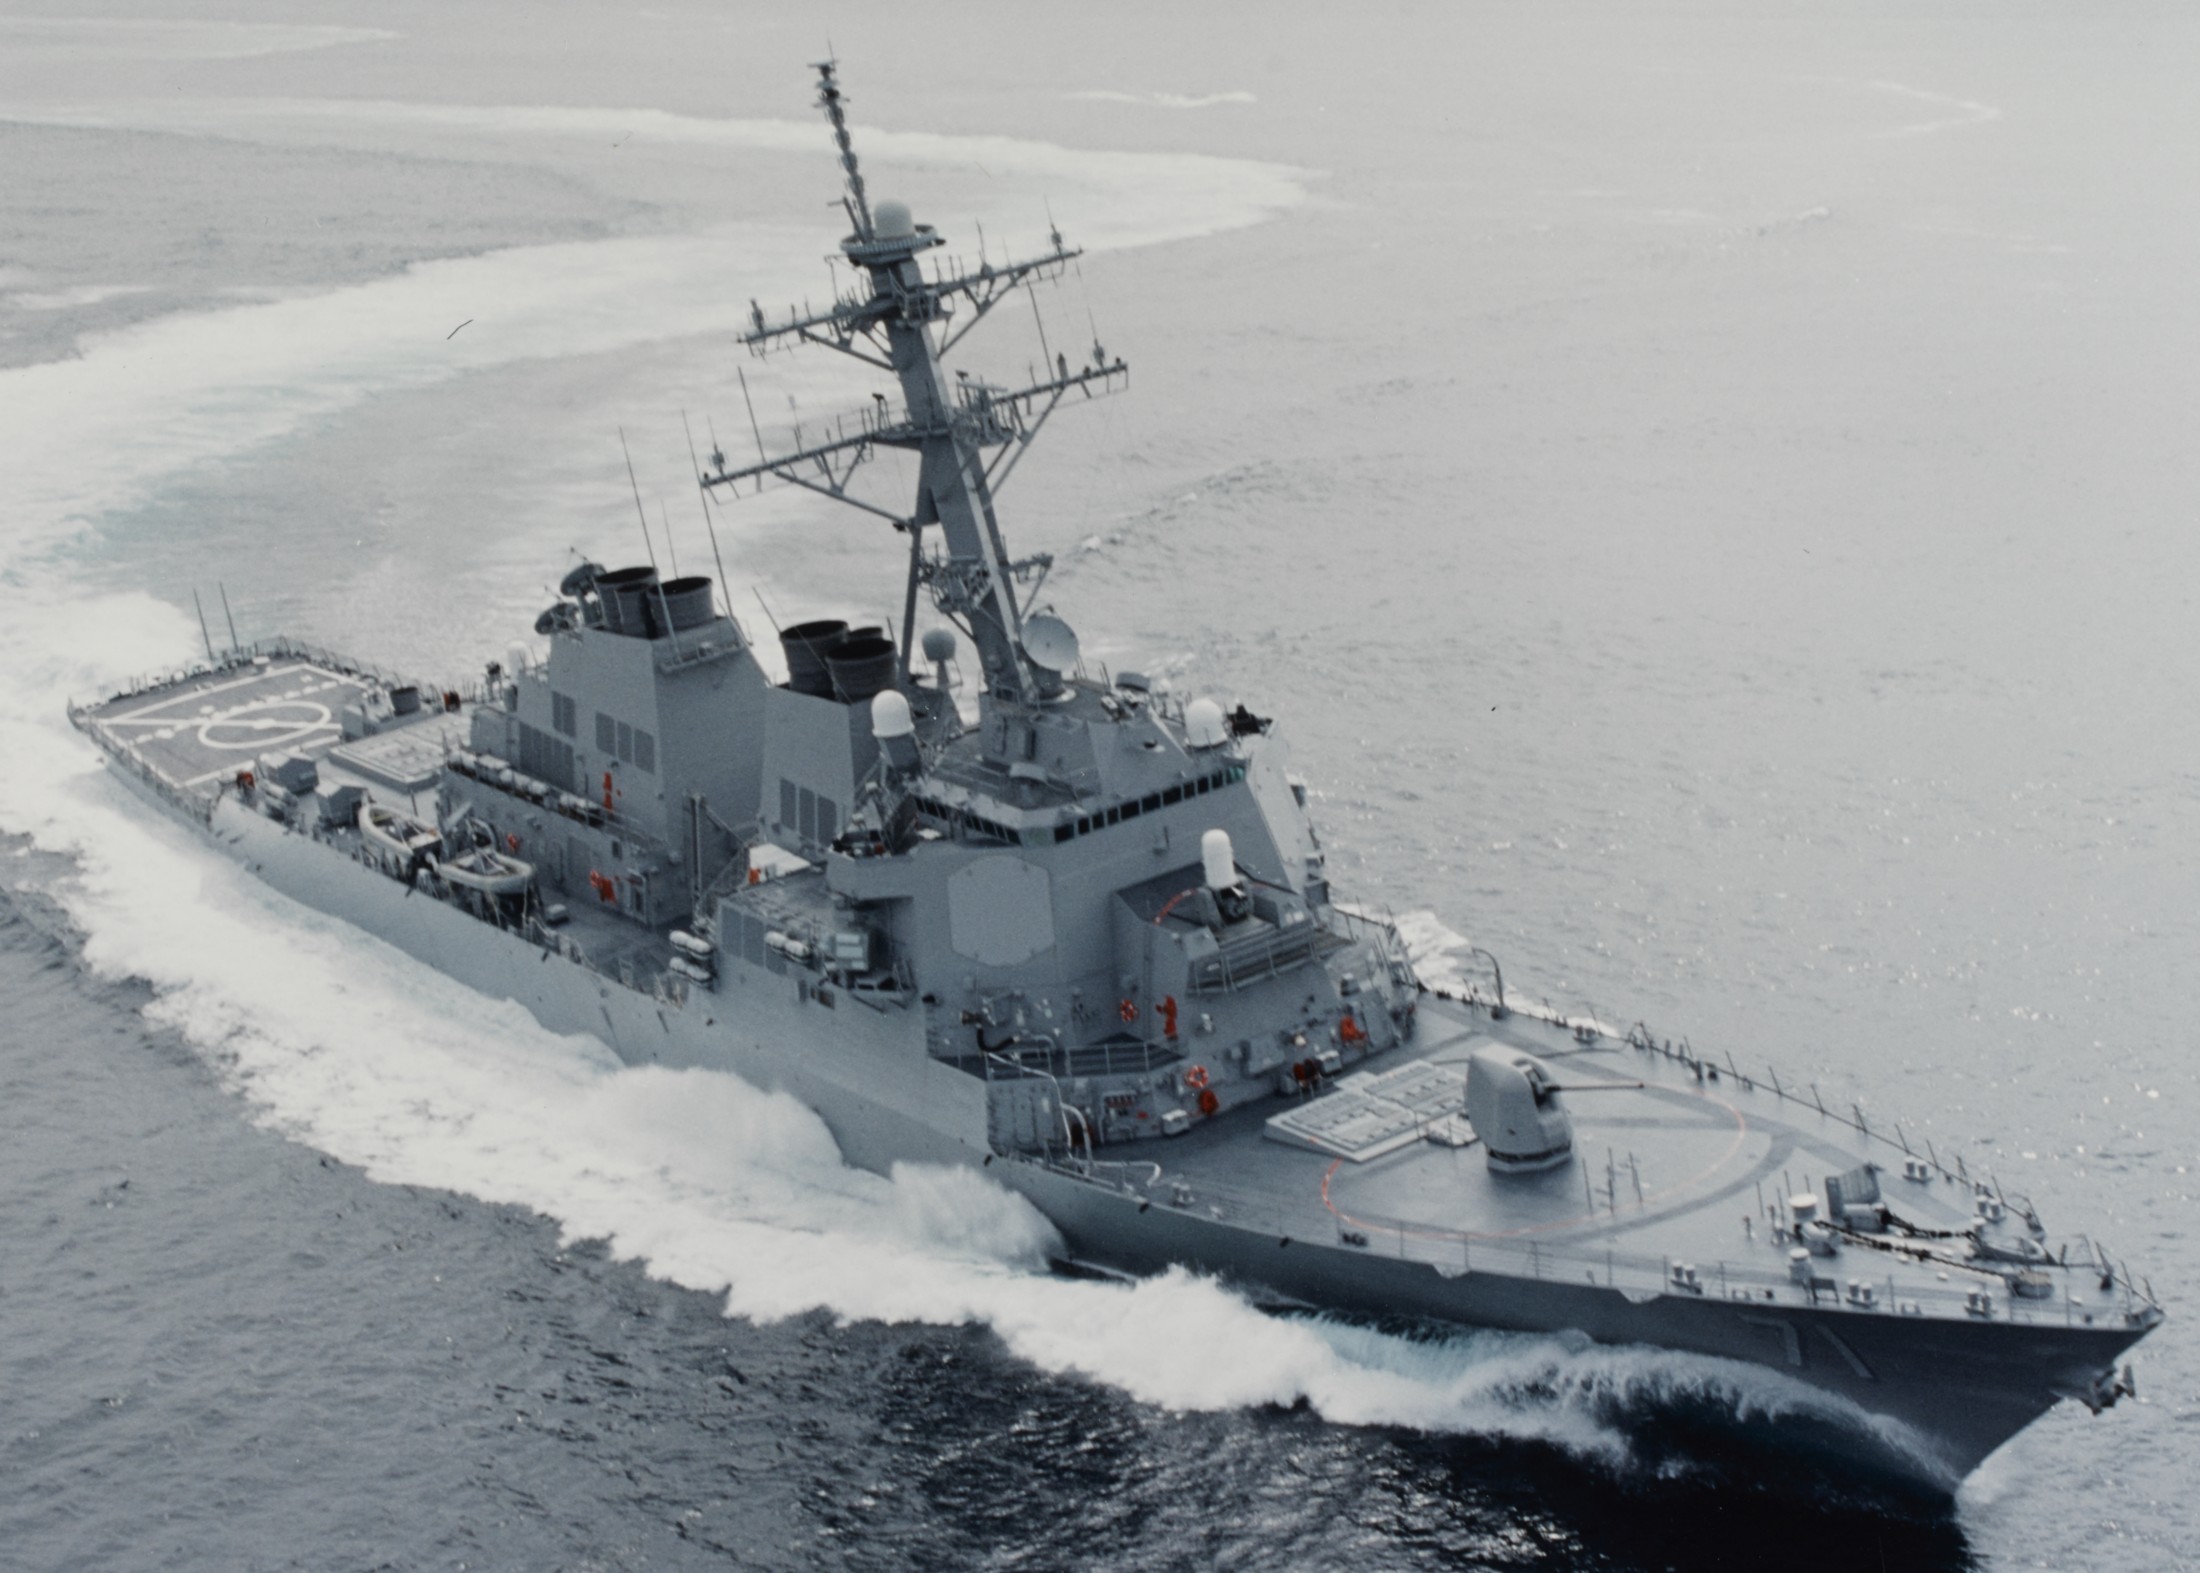 ddg-71 uss ross guided missile destroyer arleigh burke class aegis bmd 104 builders trials